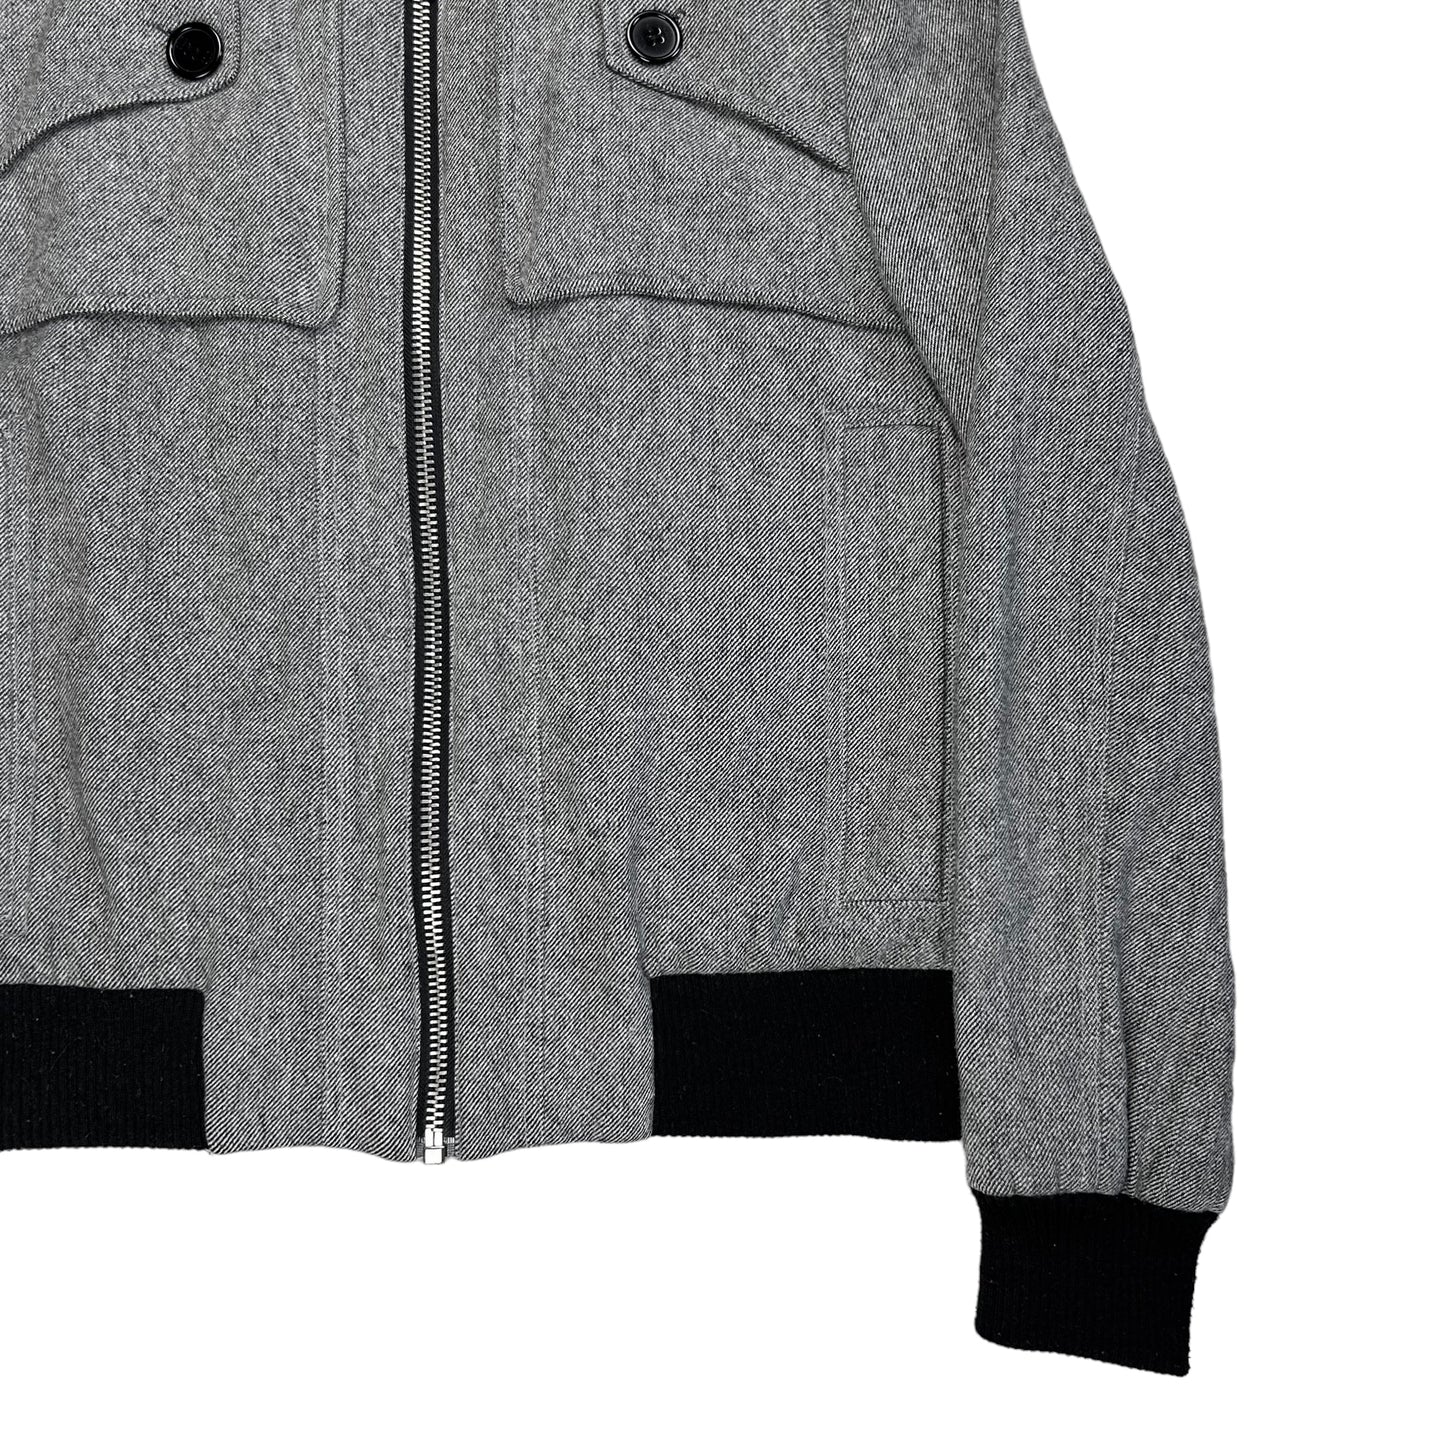 Dior Homme Triple Chest Layer Bomber Jacket - AW13